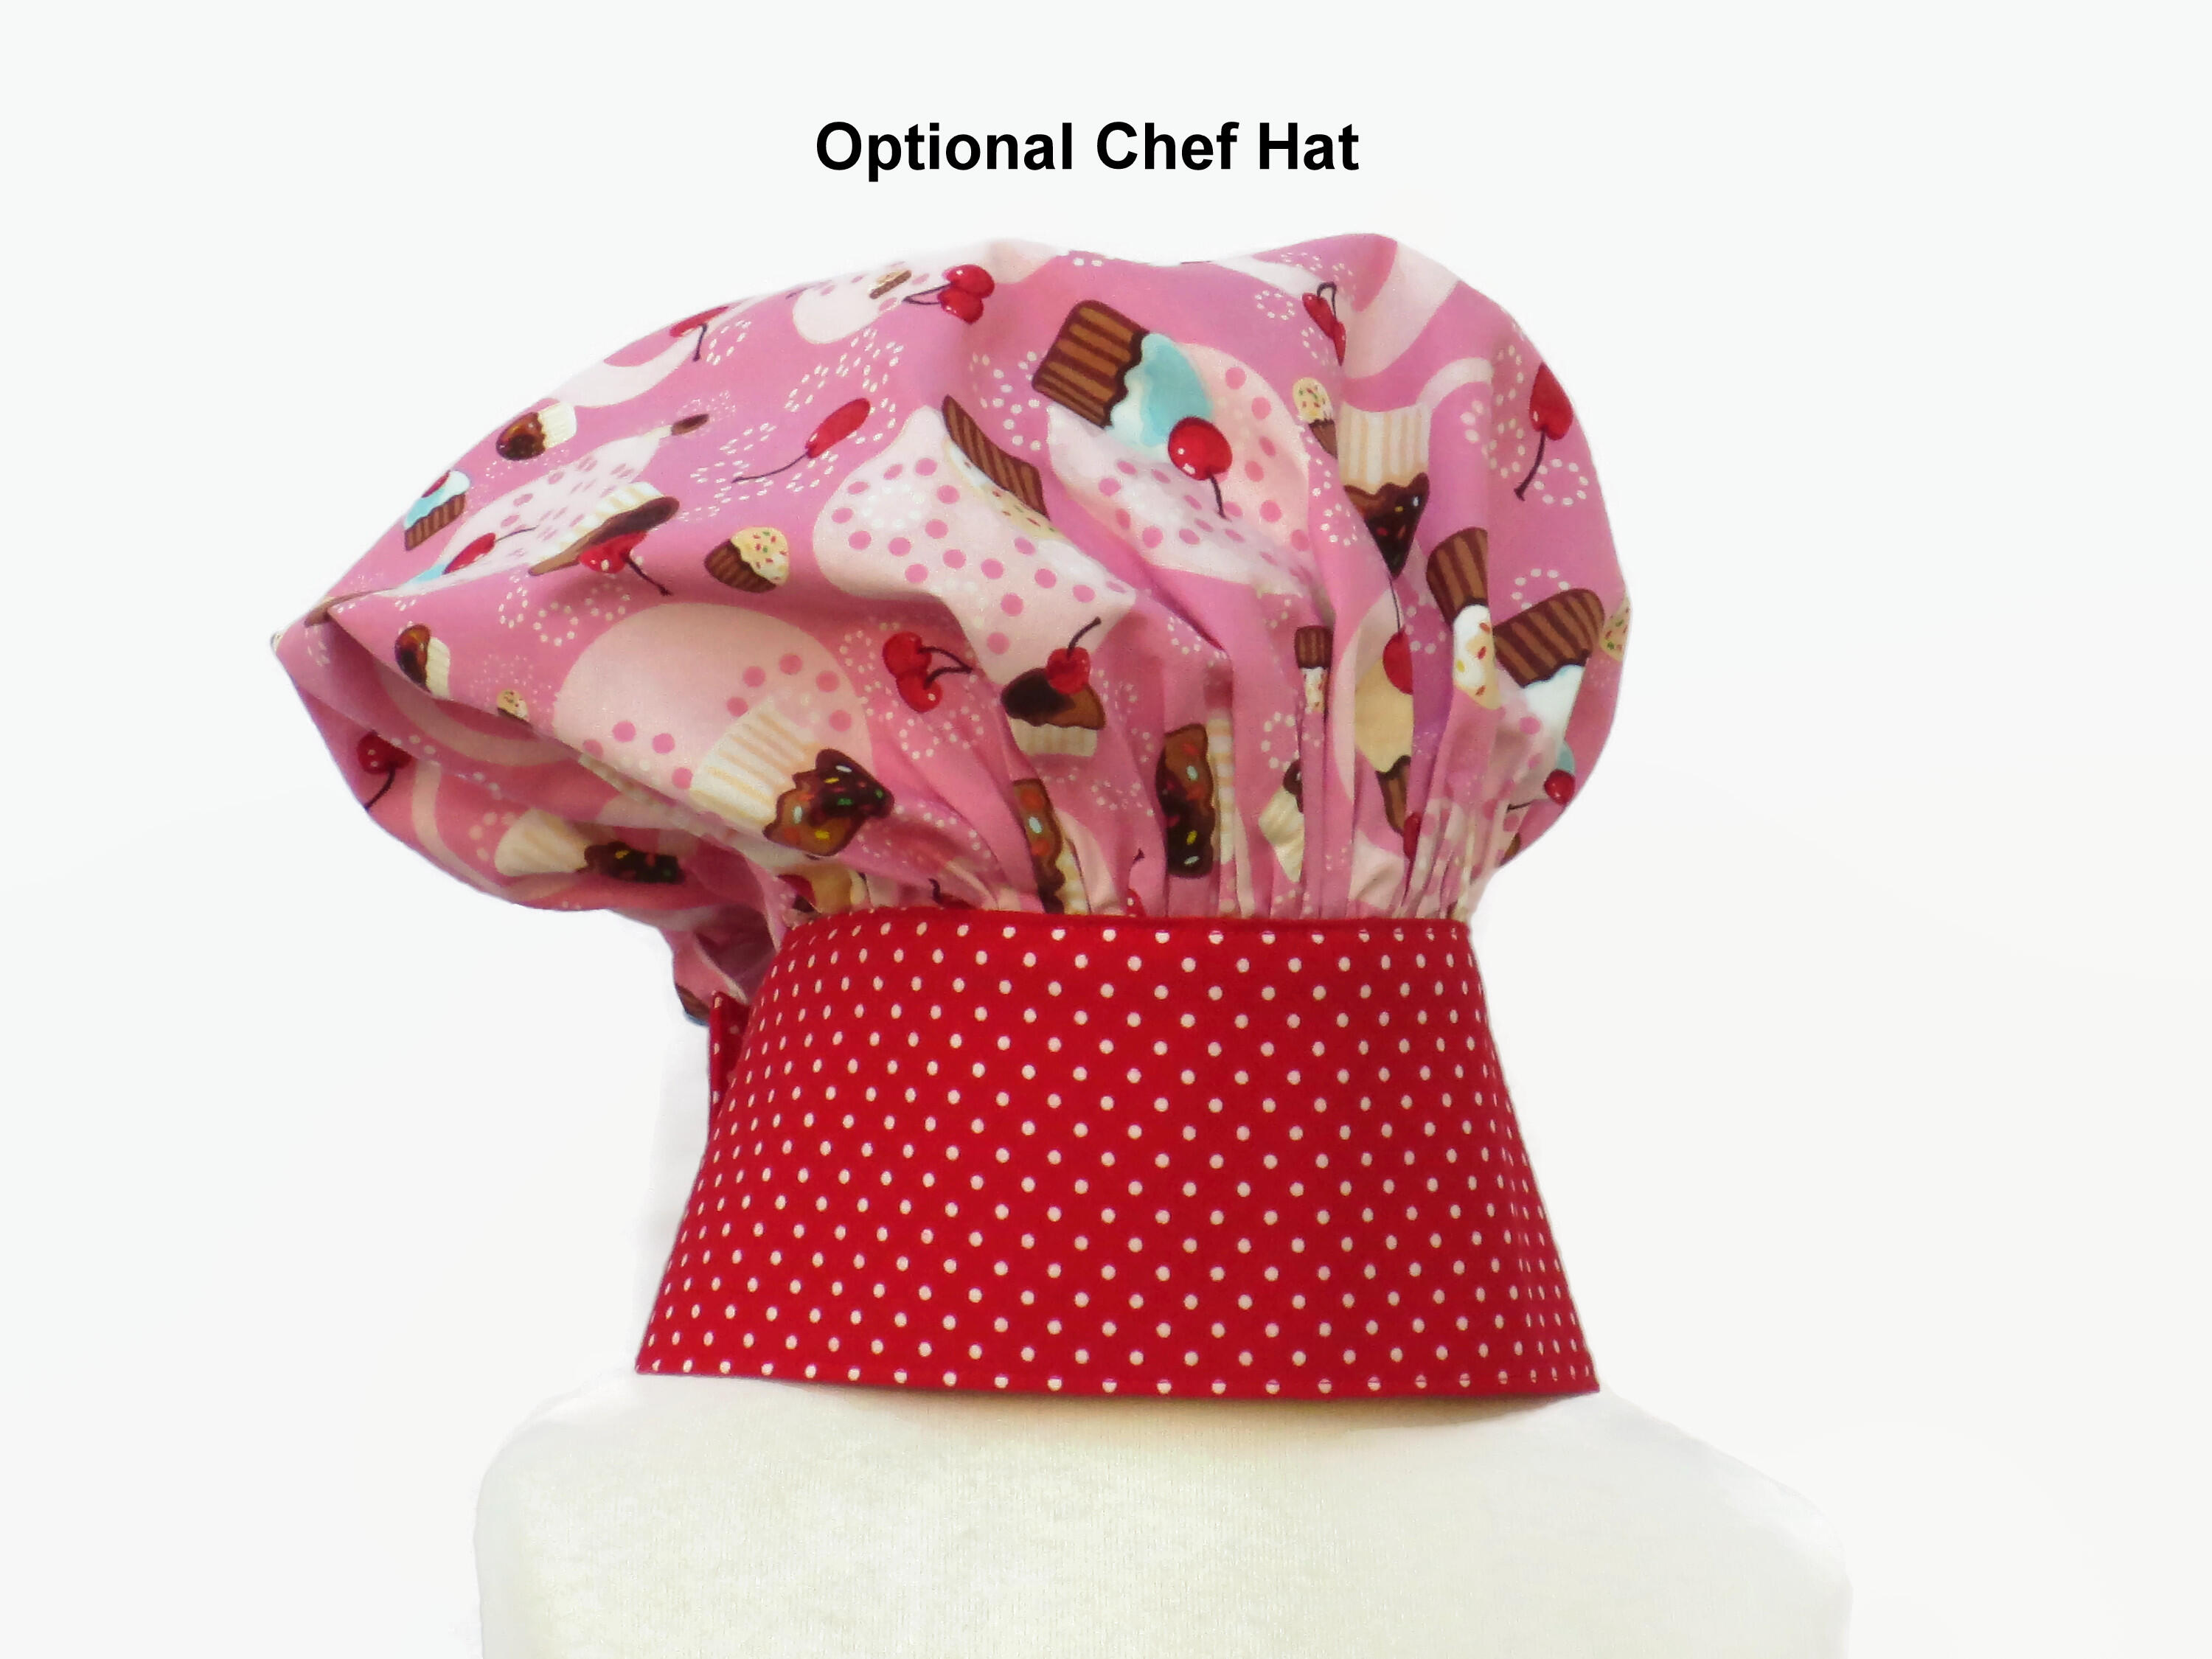 https://d1q8o8ch5u48ua.cloudfront.net/images/detailed/1848/Girl's_Pink_Cupcake_Chef_Hat_with_note.jpg?t=1692713864